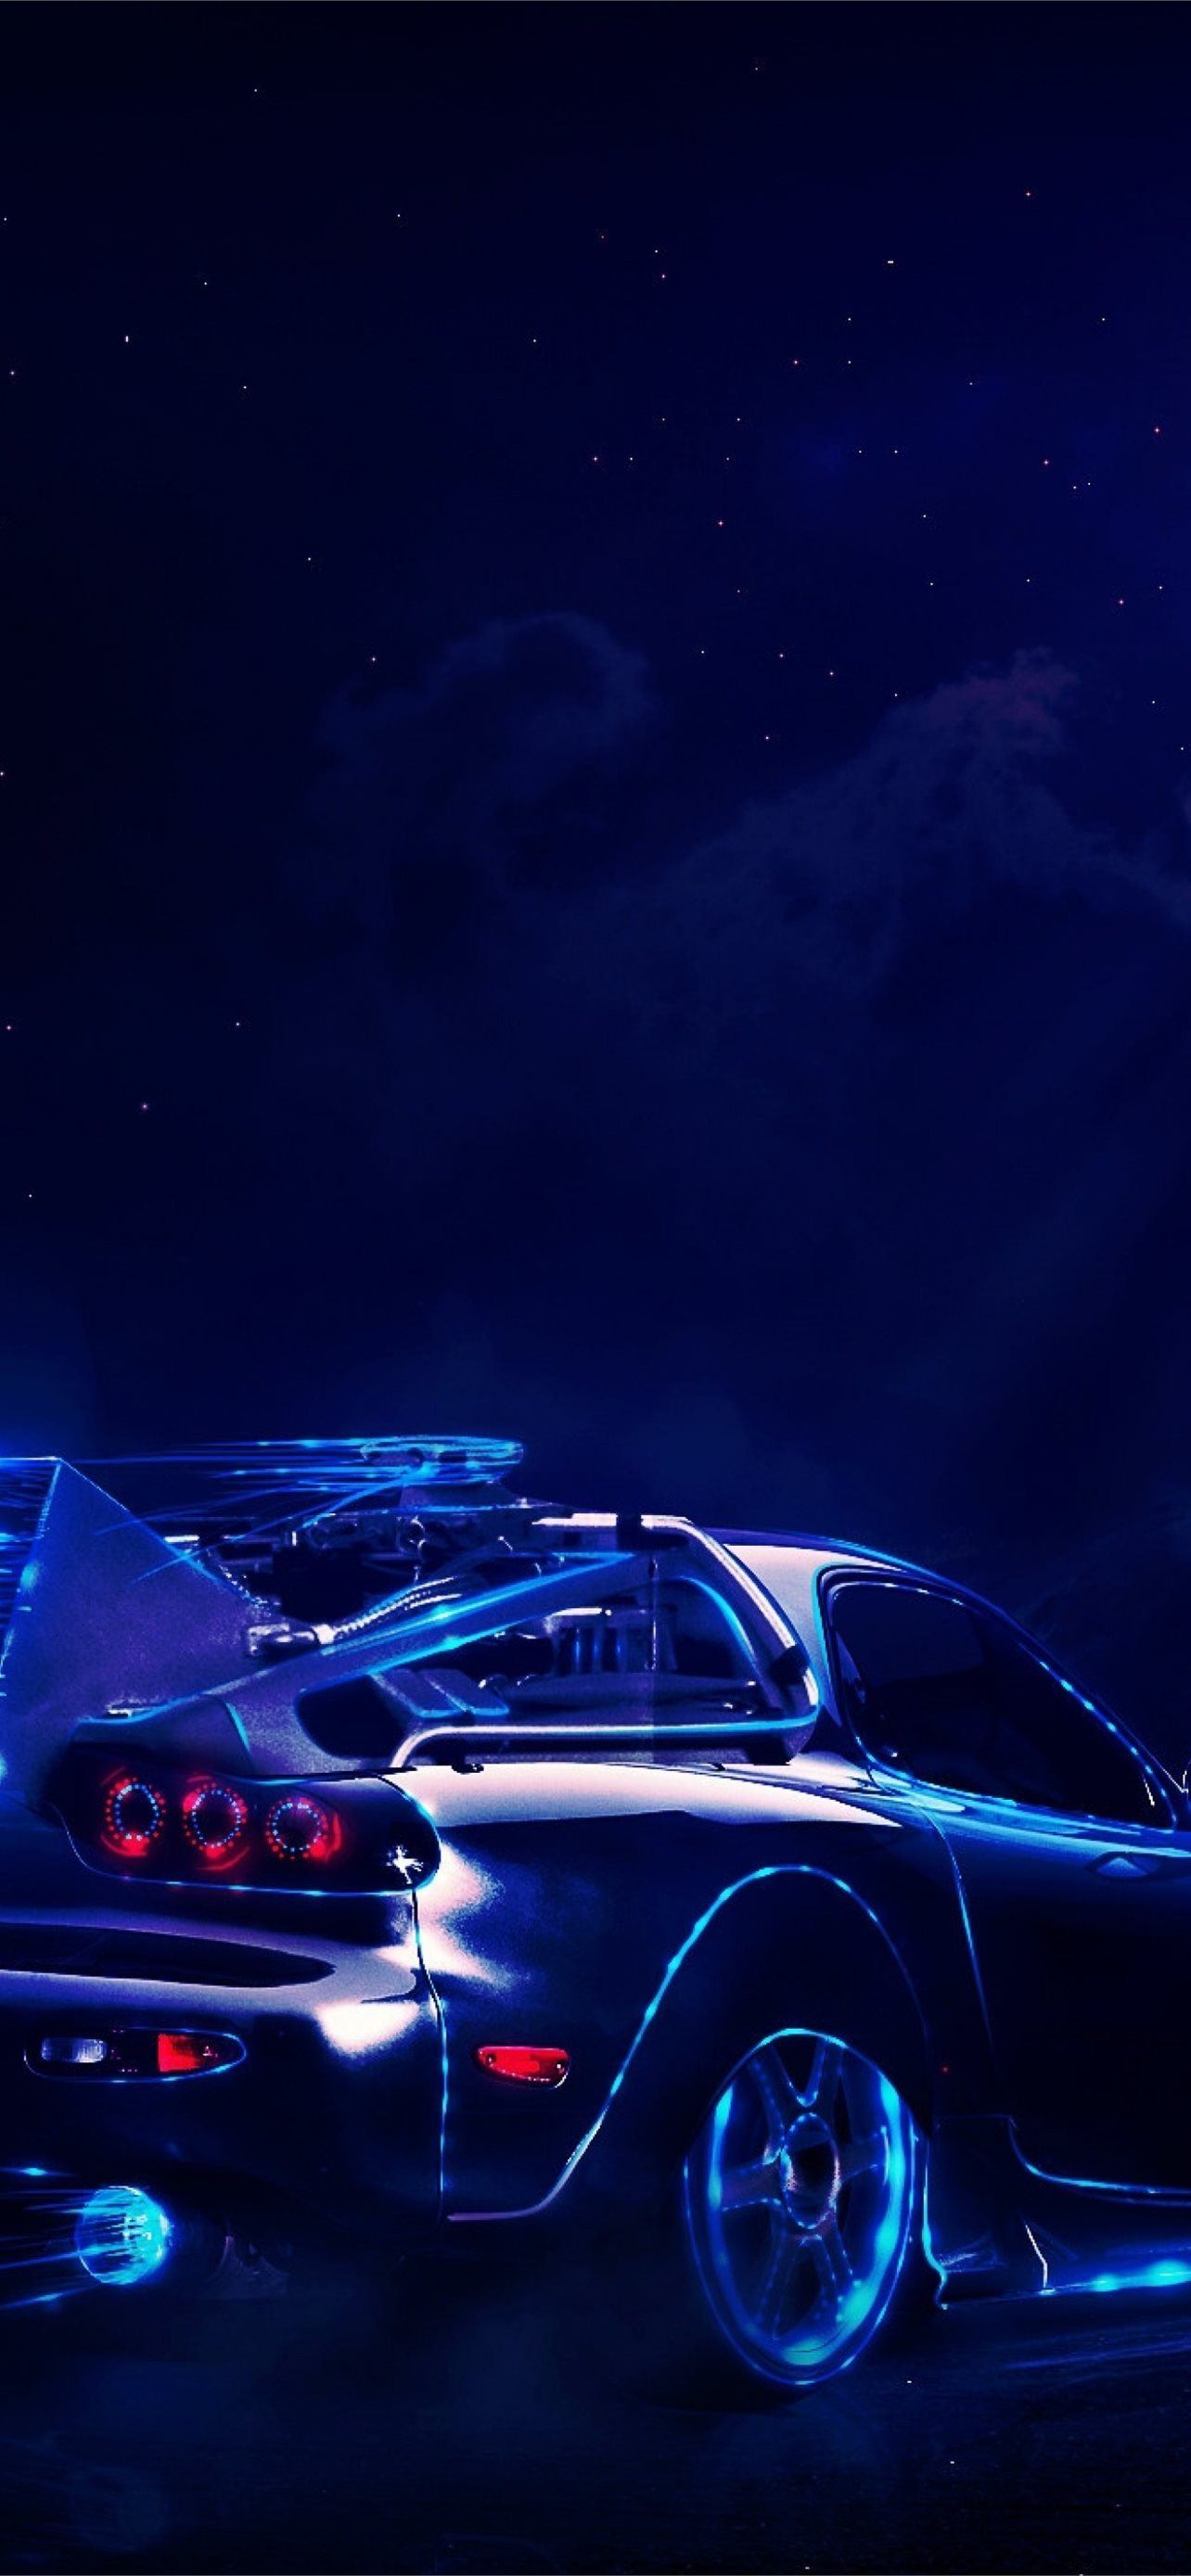 Back To The Future Mazda Rx7 Moon Digital Art 4k S. iPhone Wallpaper Free Download